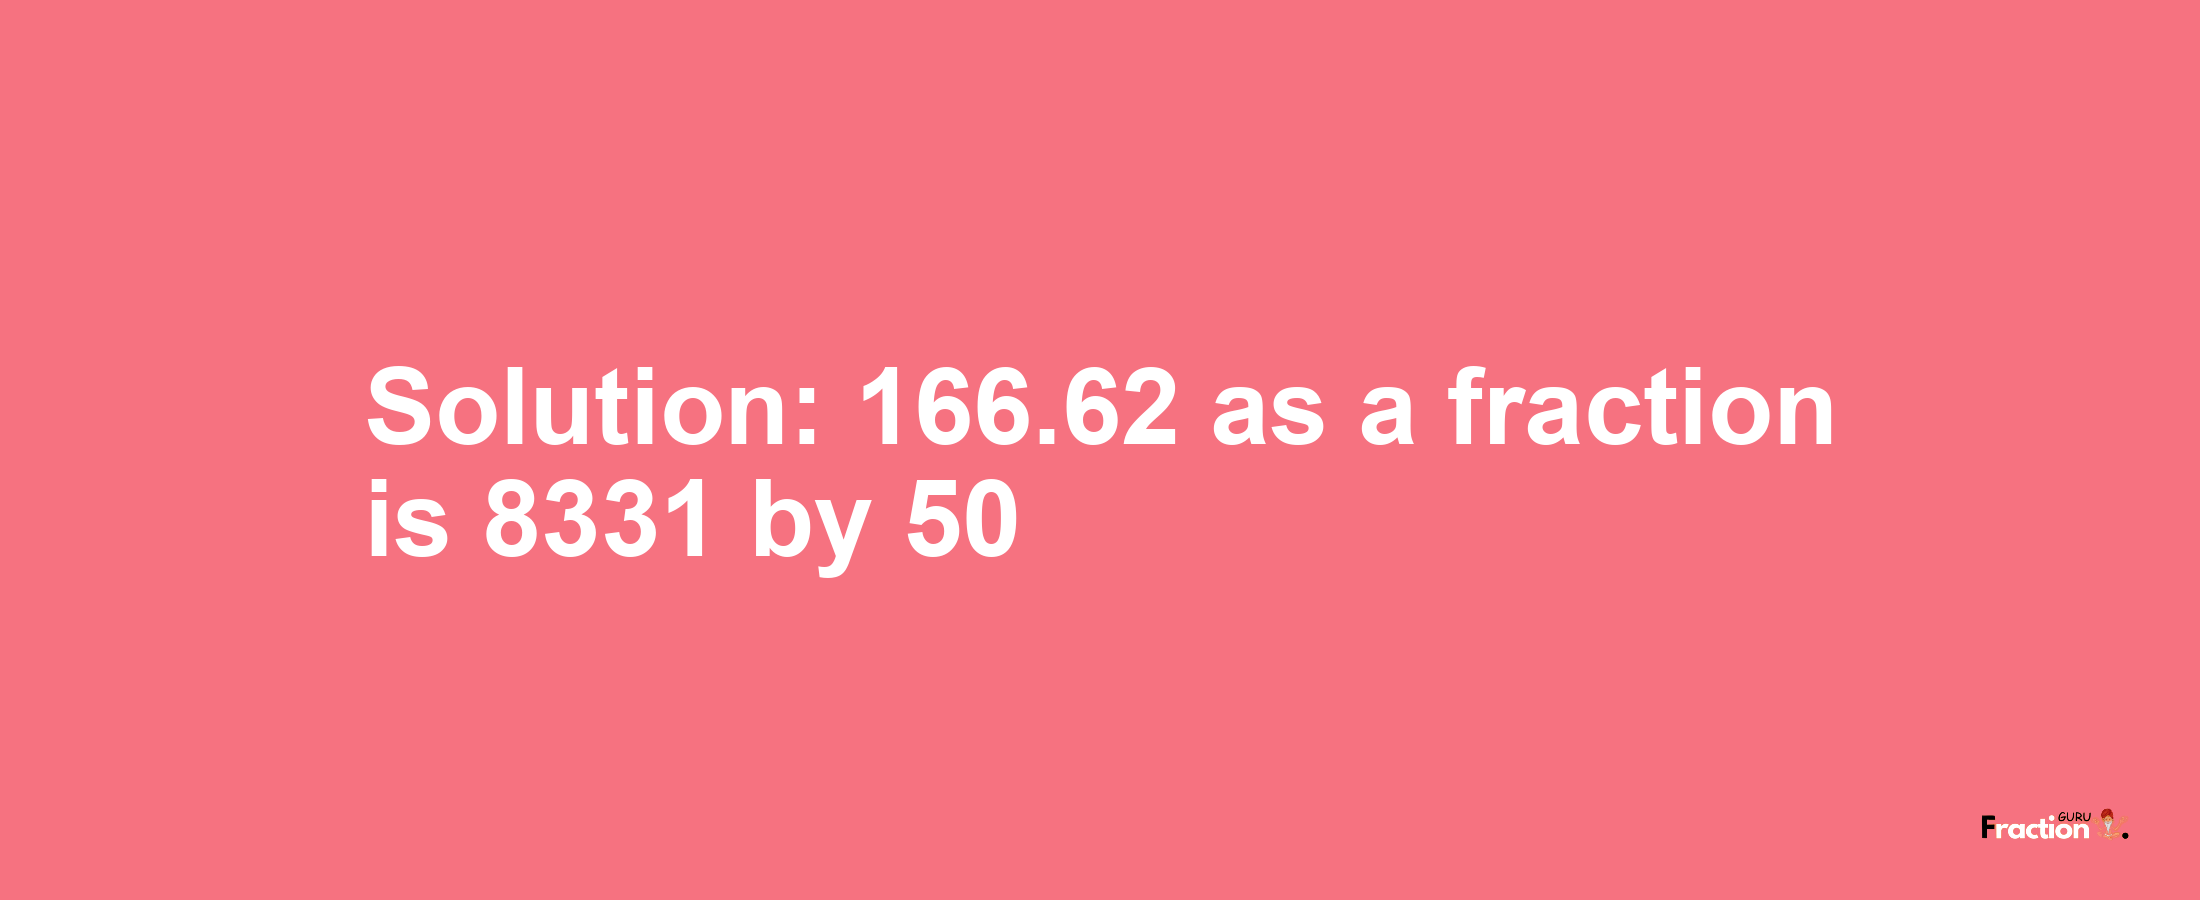 Solution:166.62 as a fraction is 8331/50